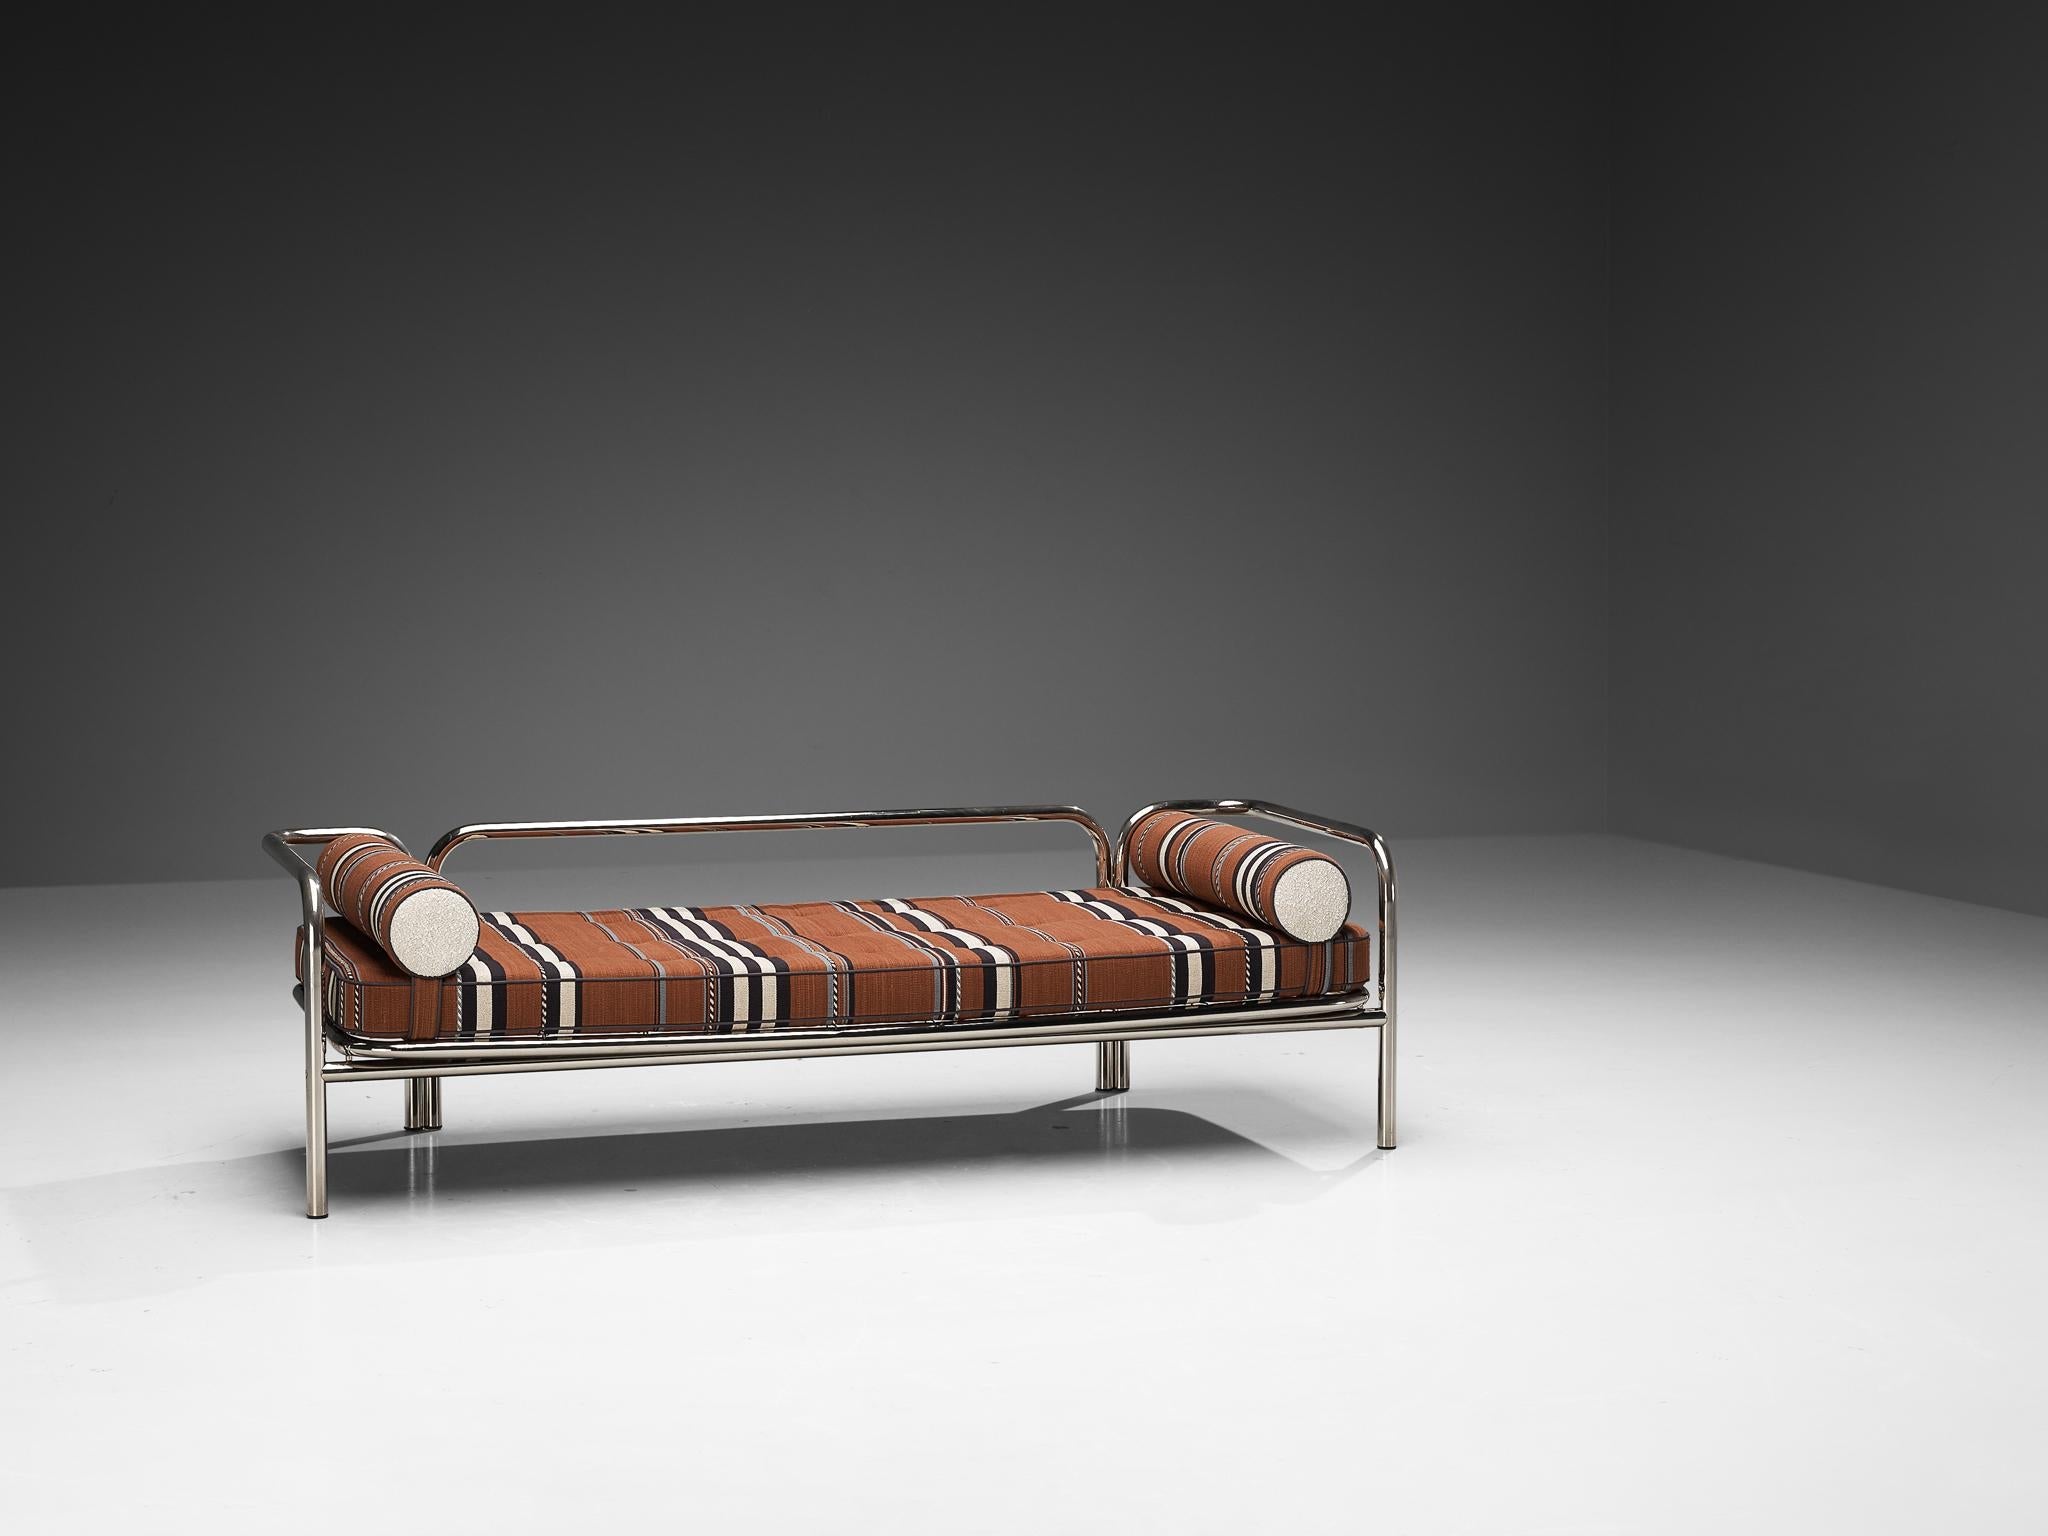 Gae Aulenti for Poltronova 'Locus Solus' Daybed in Chrome-Plated Steel